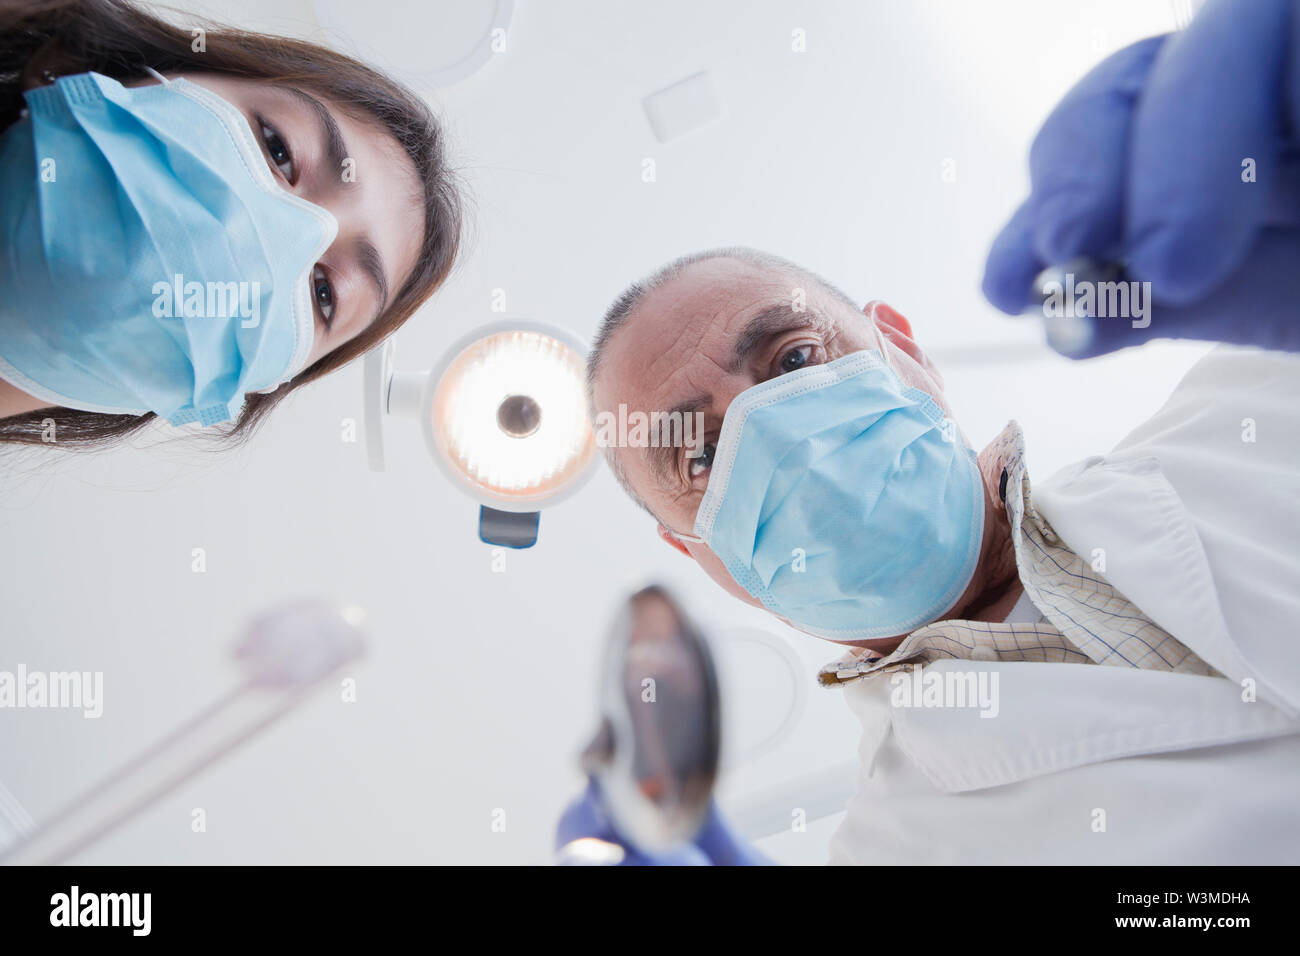 View directly below dental hygienist and dentist during examination Stock Photo